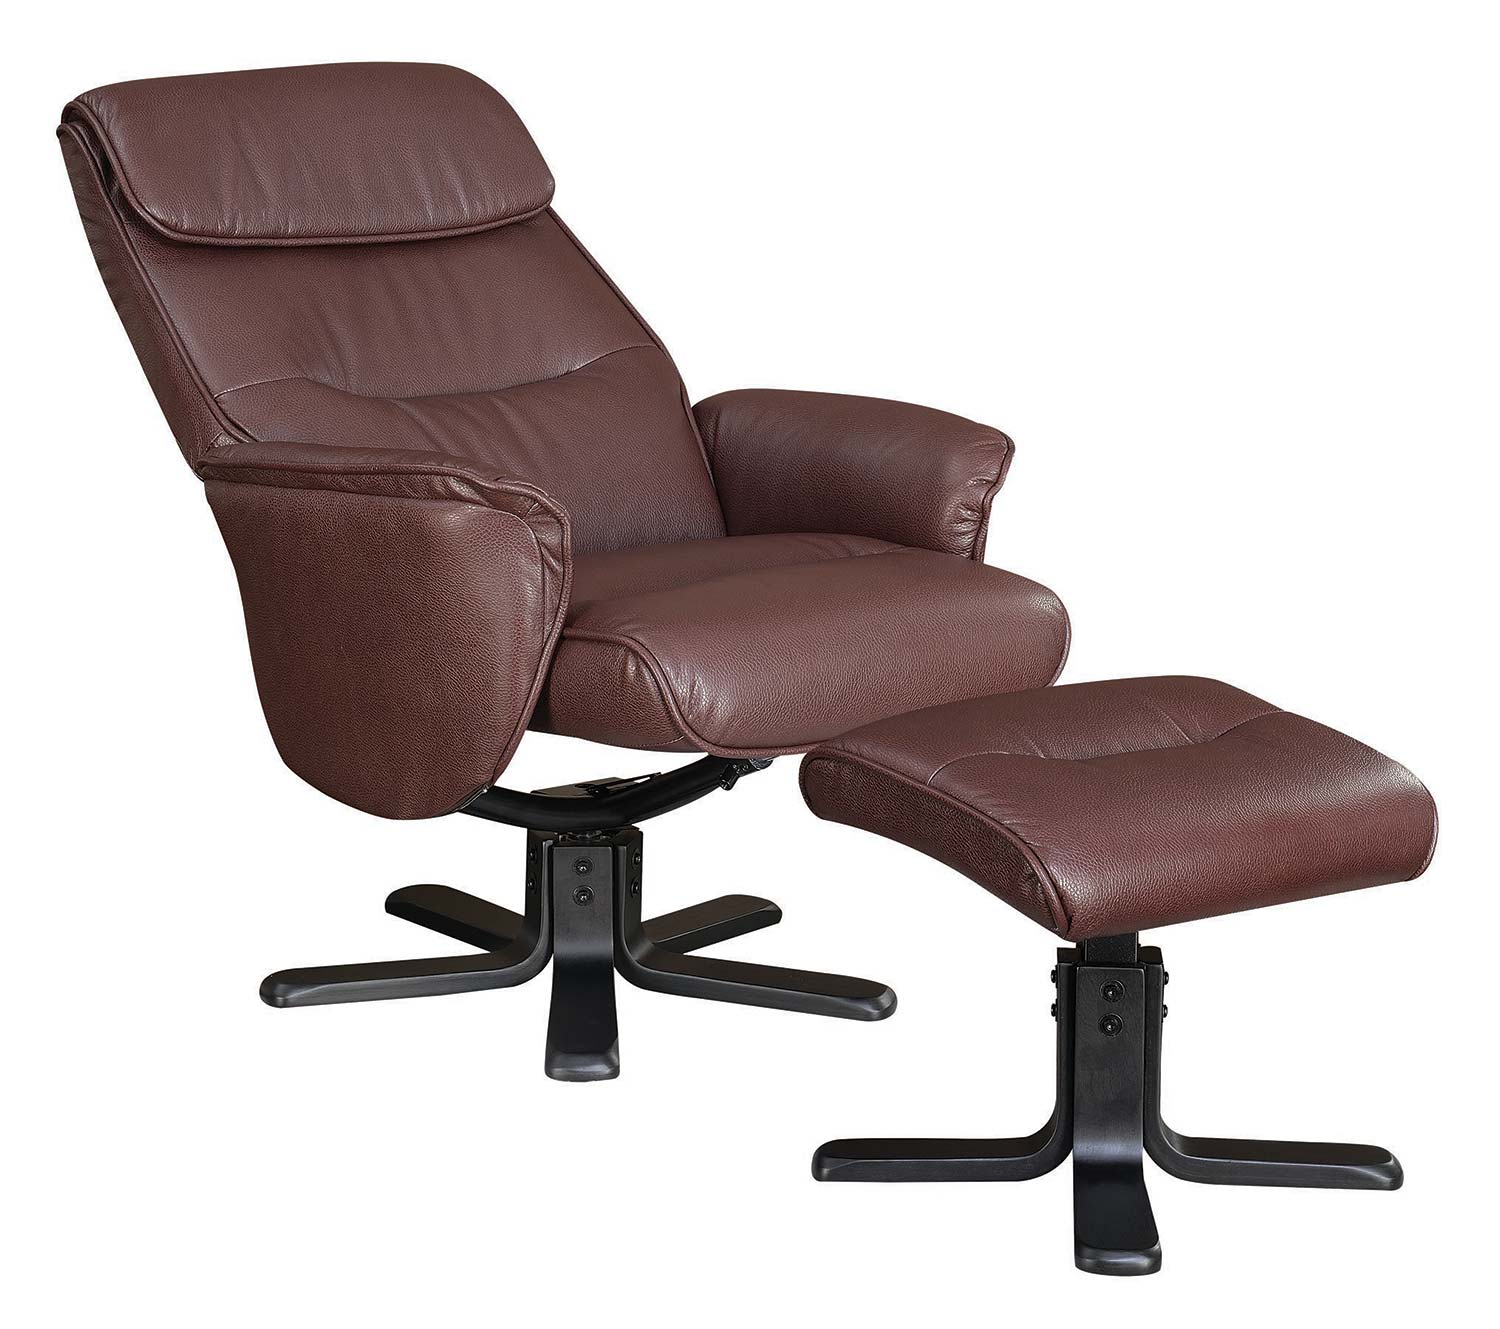 Coaster 600057 Glider Recliner with Ottoman - Brown